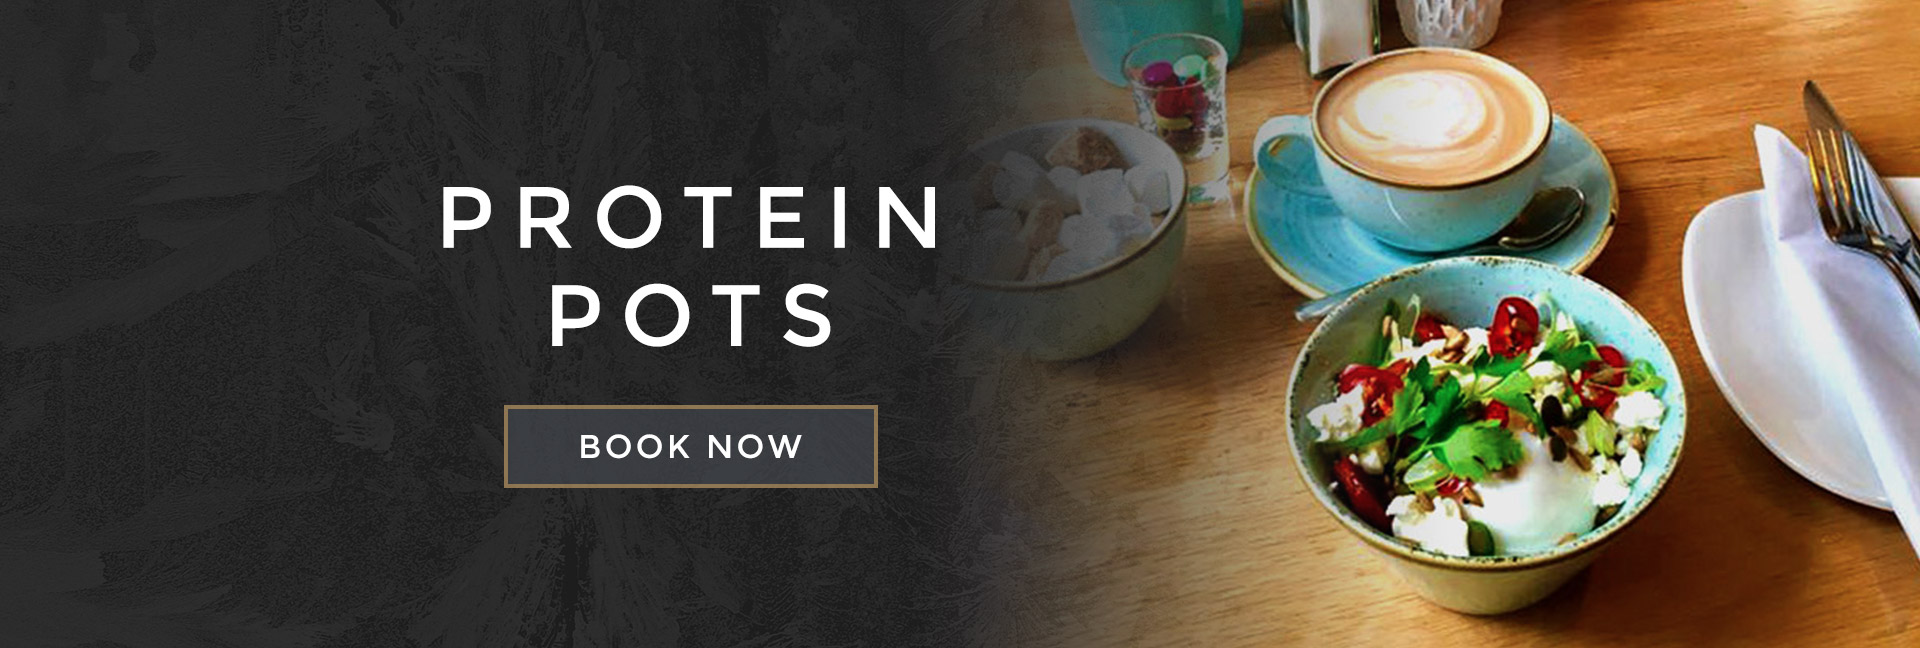 Protein pots at All Bar One Butlers Wharf - Book your table